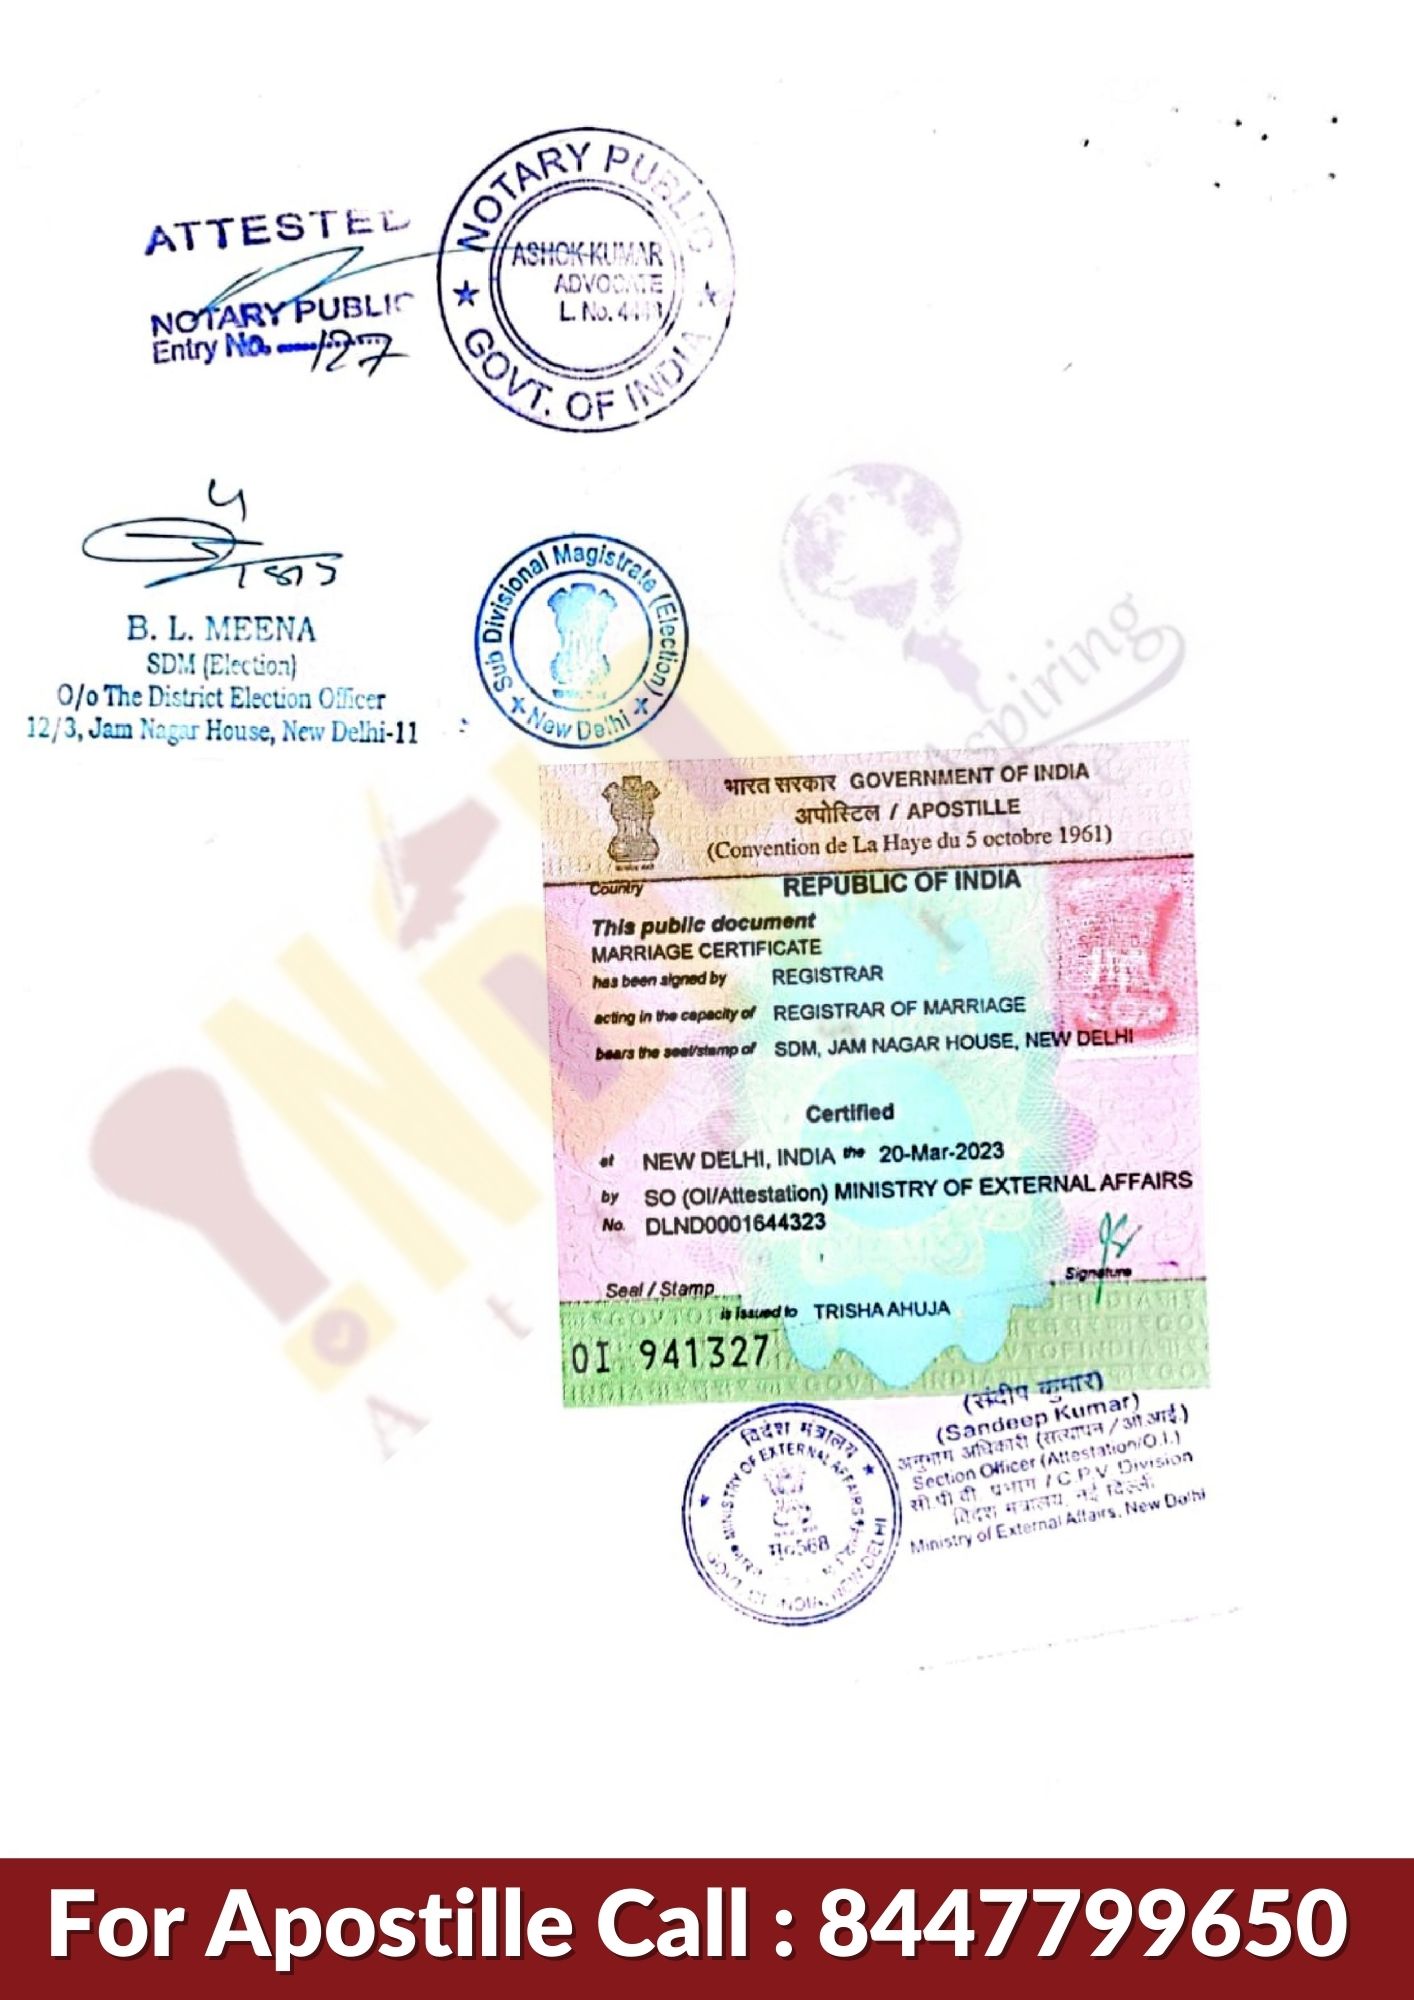 Apostille services for netharlands